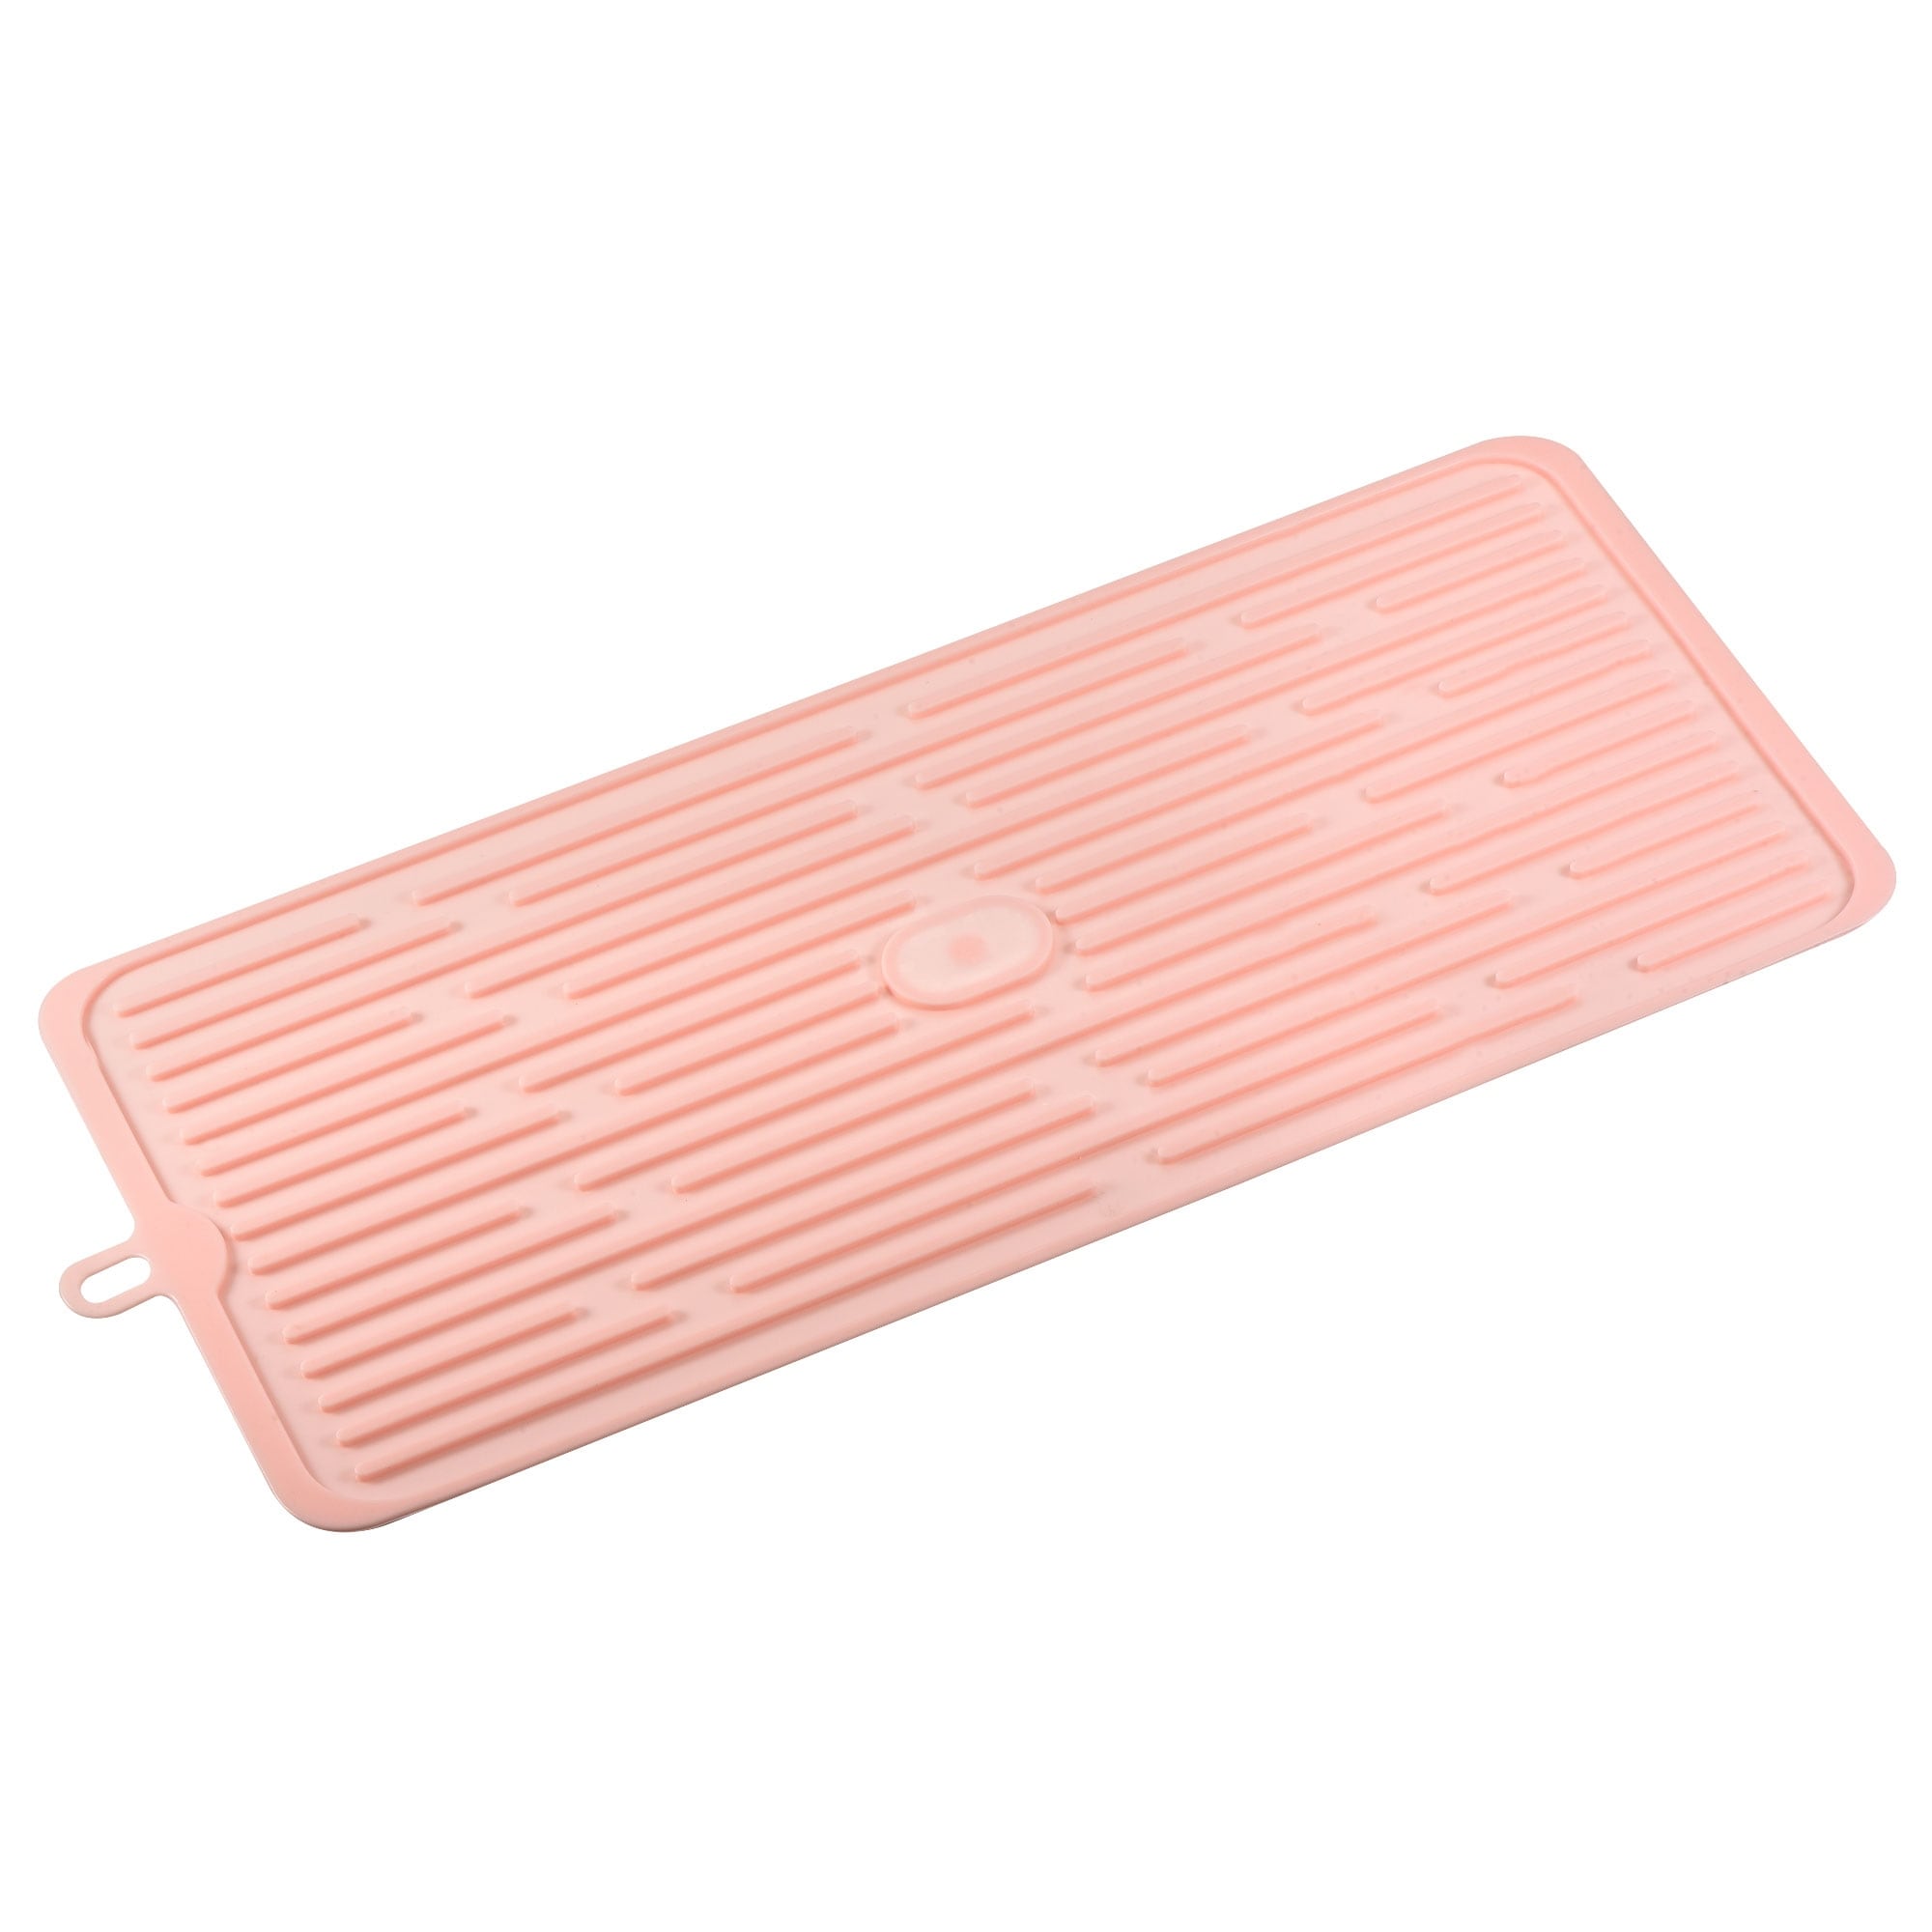 Dish Drying Mat, Silicone Kitchen Drainer Mat, Rectangle